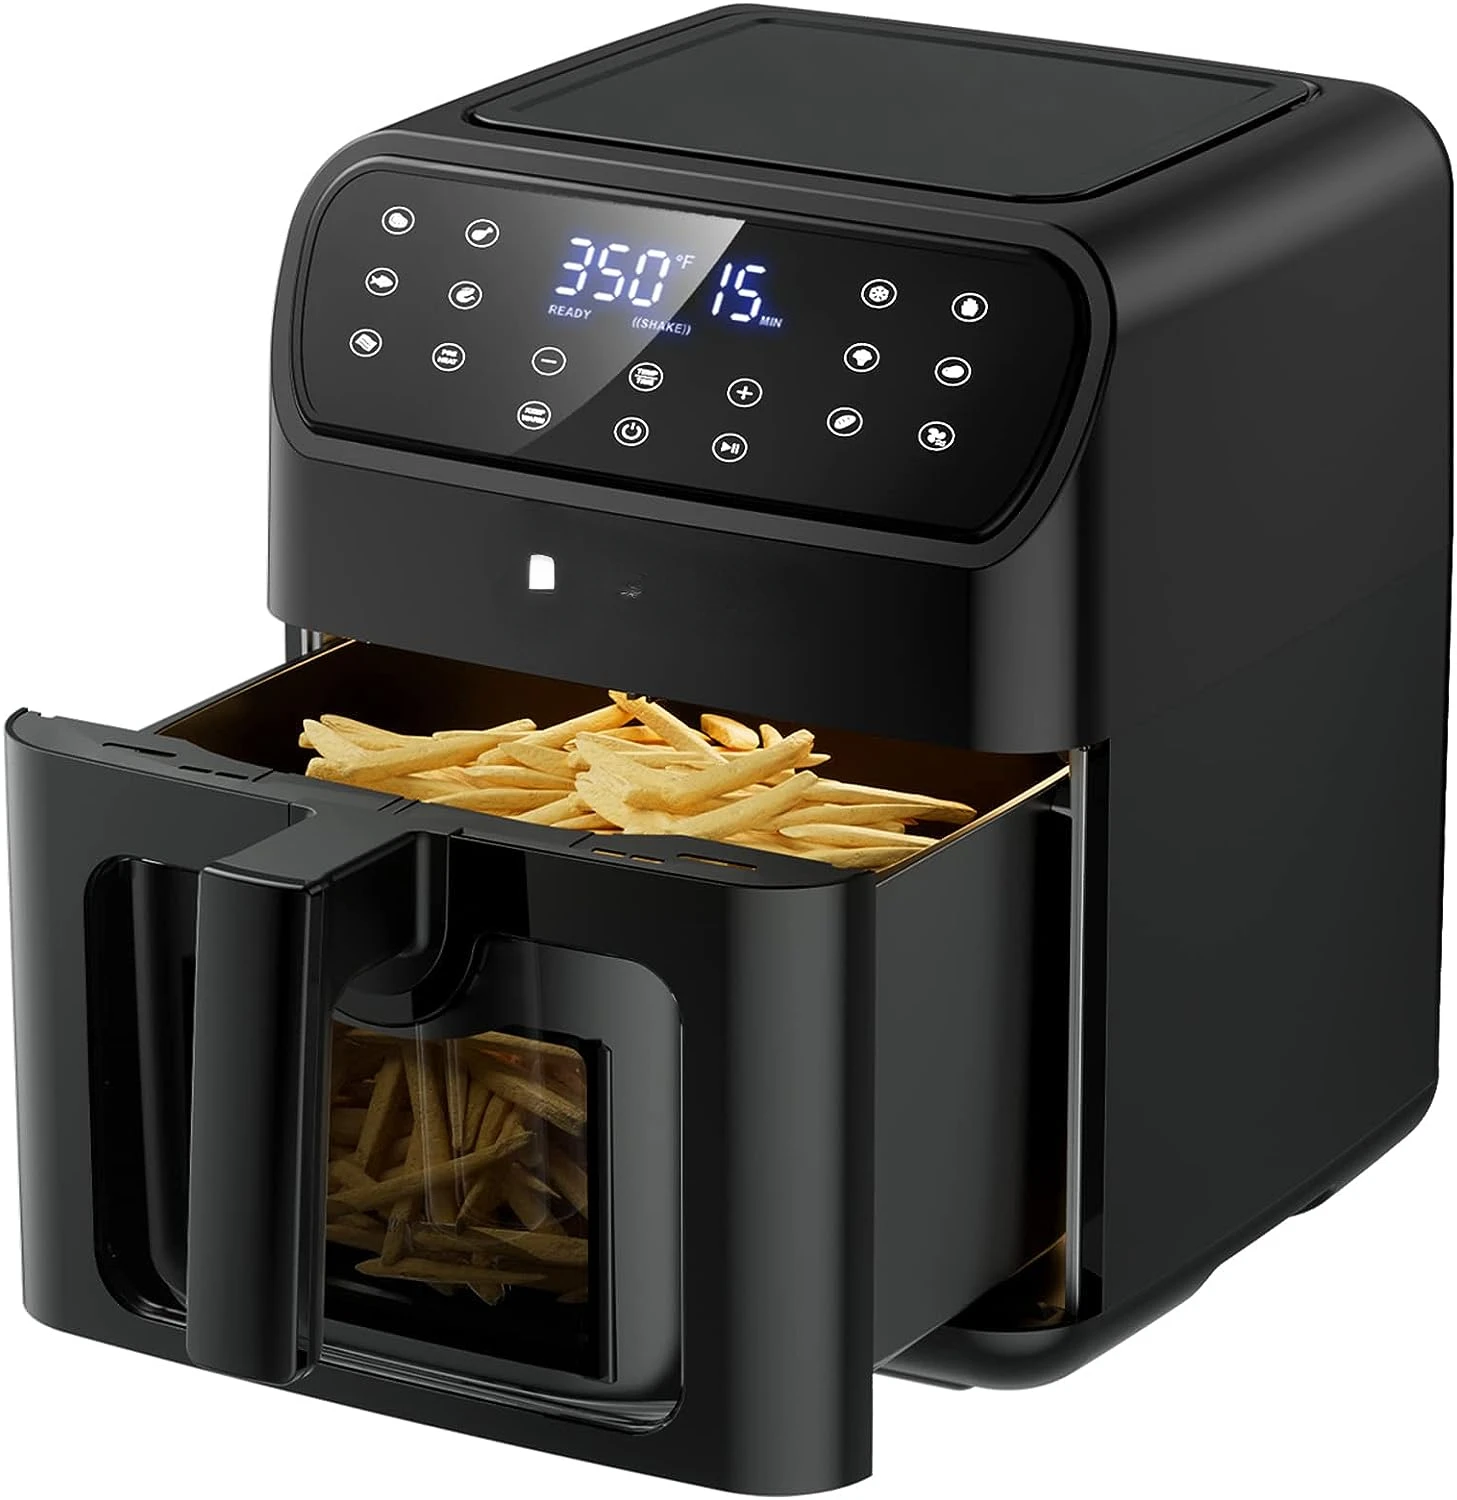 

Fryers Oven, GANIZA 6 Quart Oilless Air Fryer with Visible Cooking Window, One-Touch Screen with 13 Functions, Nonstick and Dish